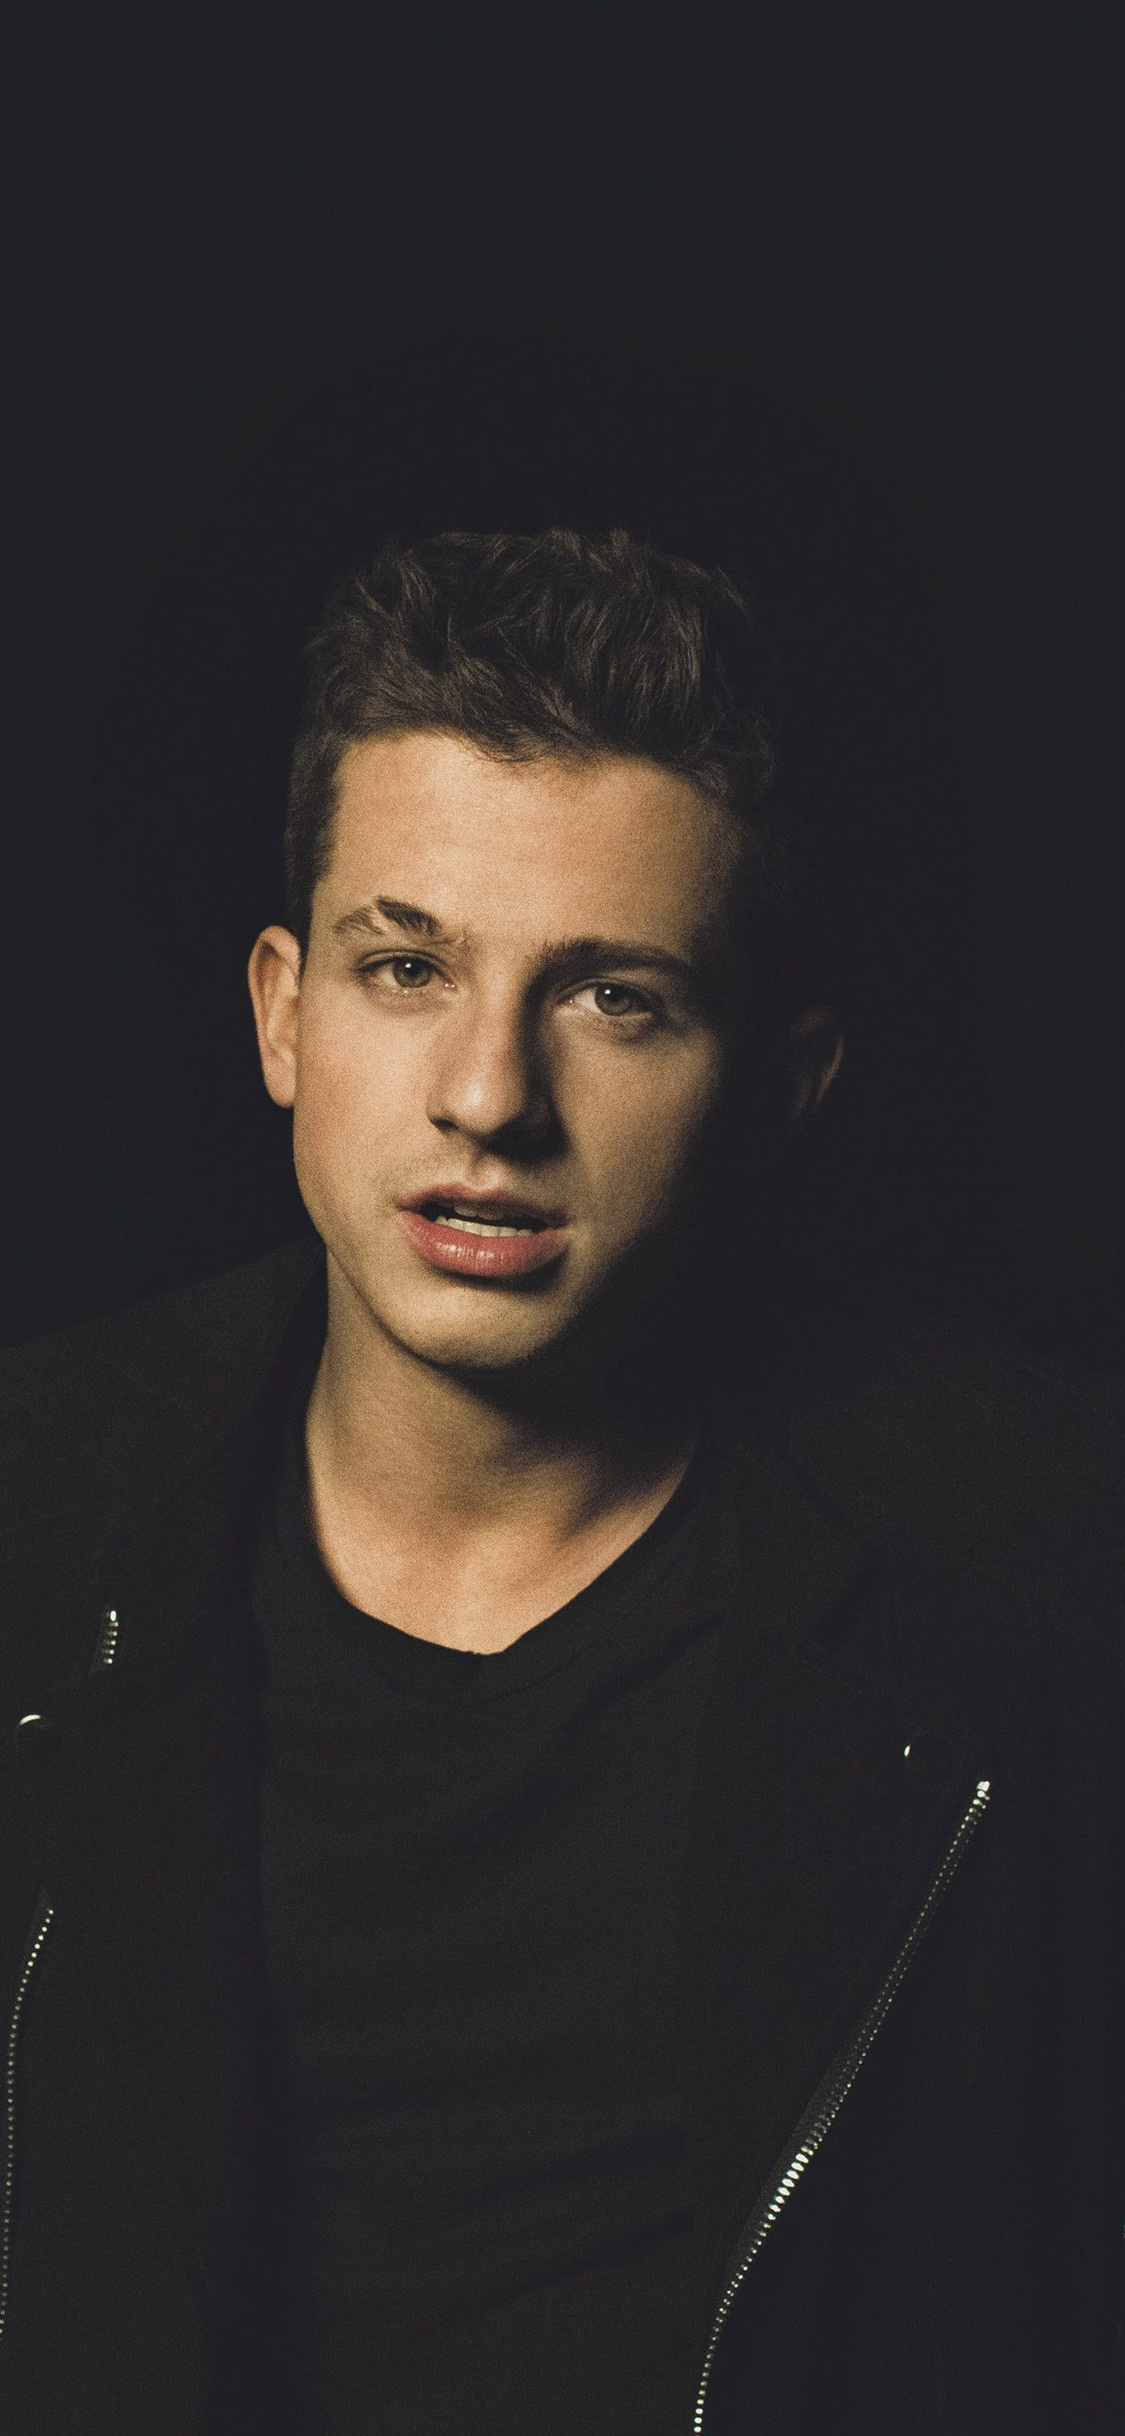 Charlie Puth: Singer-songwriter who rose to prominence thanks to the success he found on his YouTube channel. 1130x2440 HD Wallpaper.